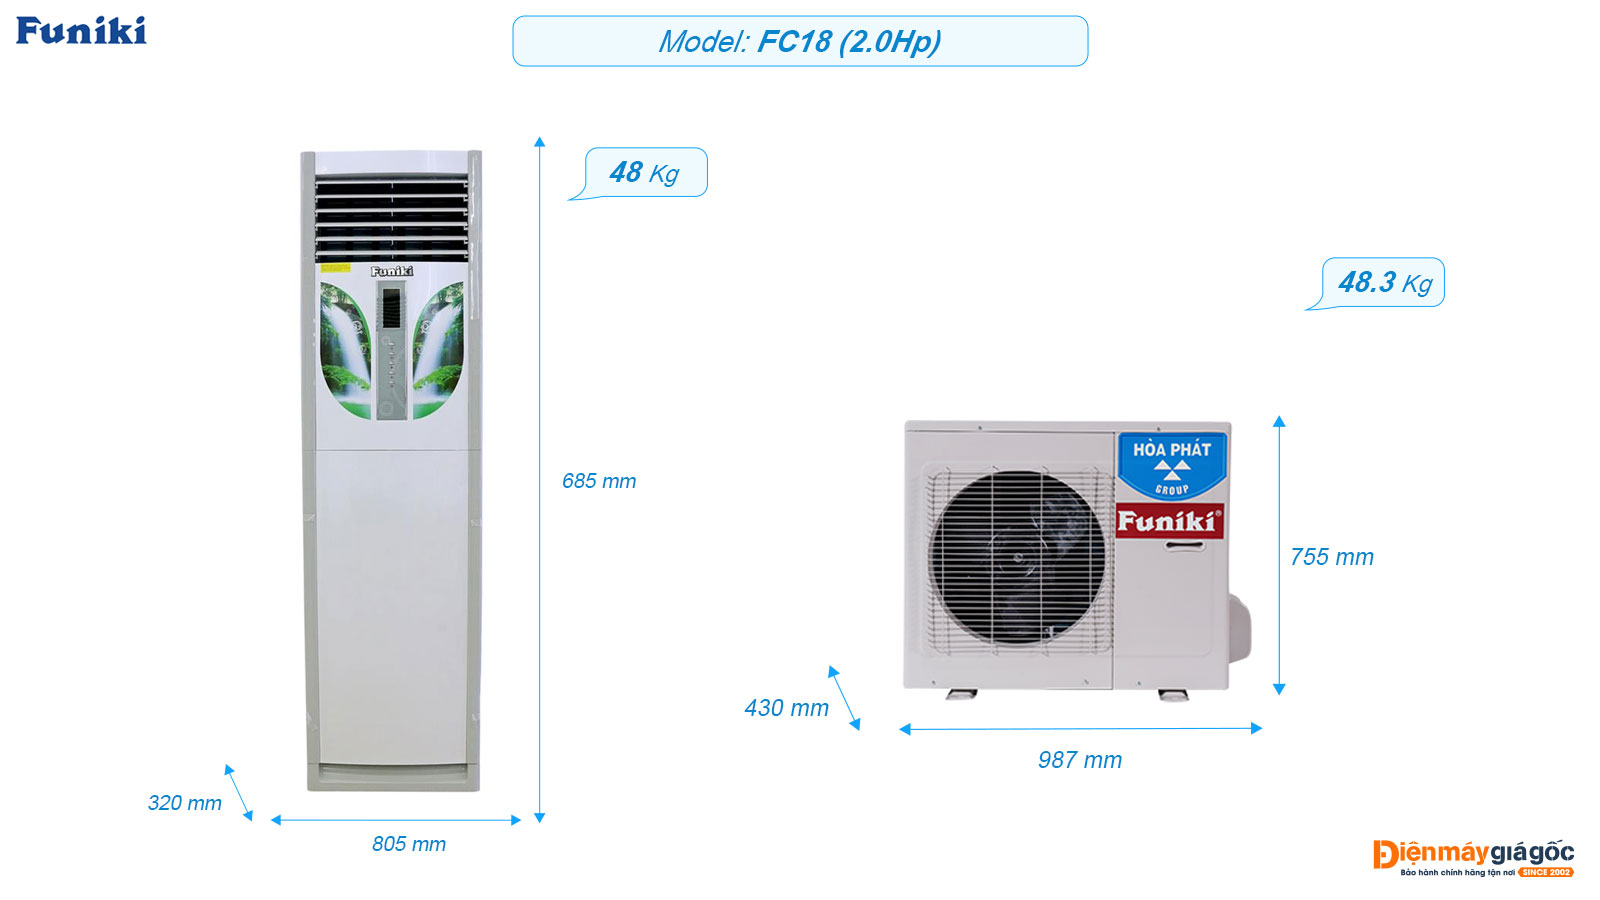 Funiki Floor standing air conditioning FC18 (2.0Hp)